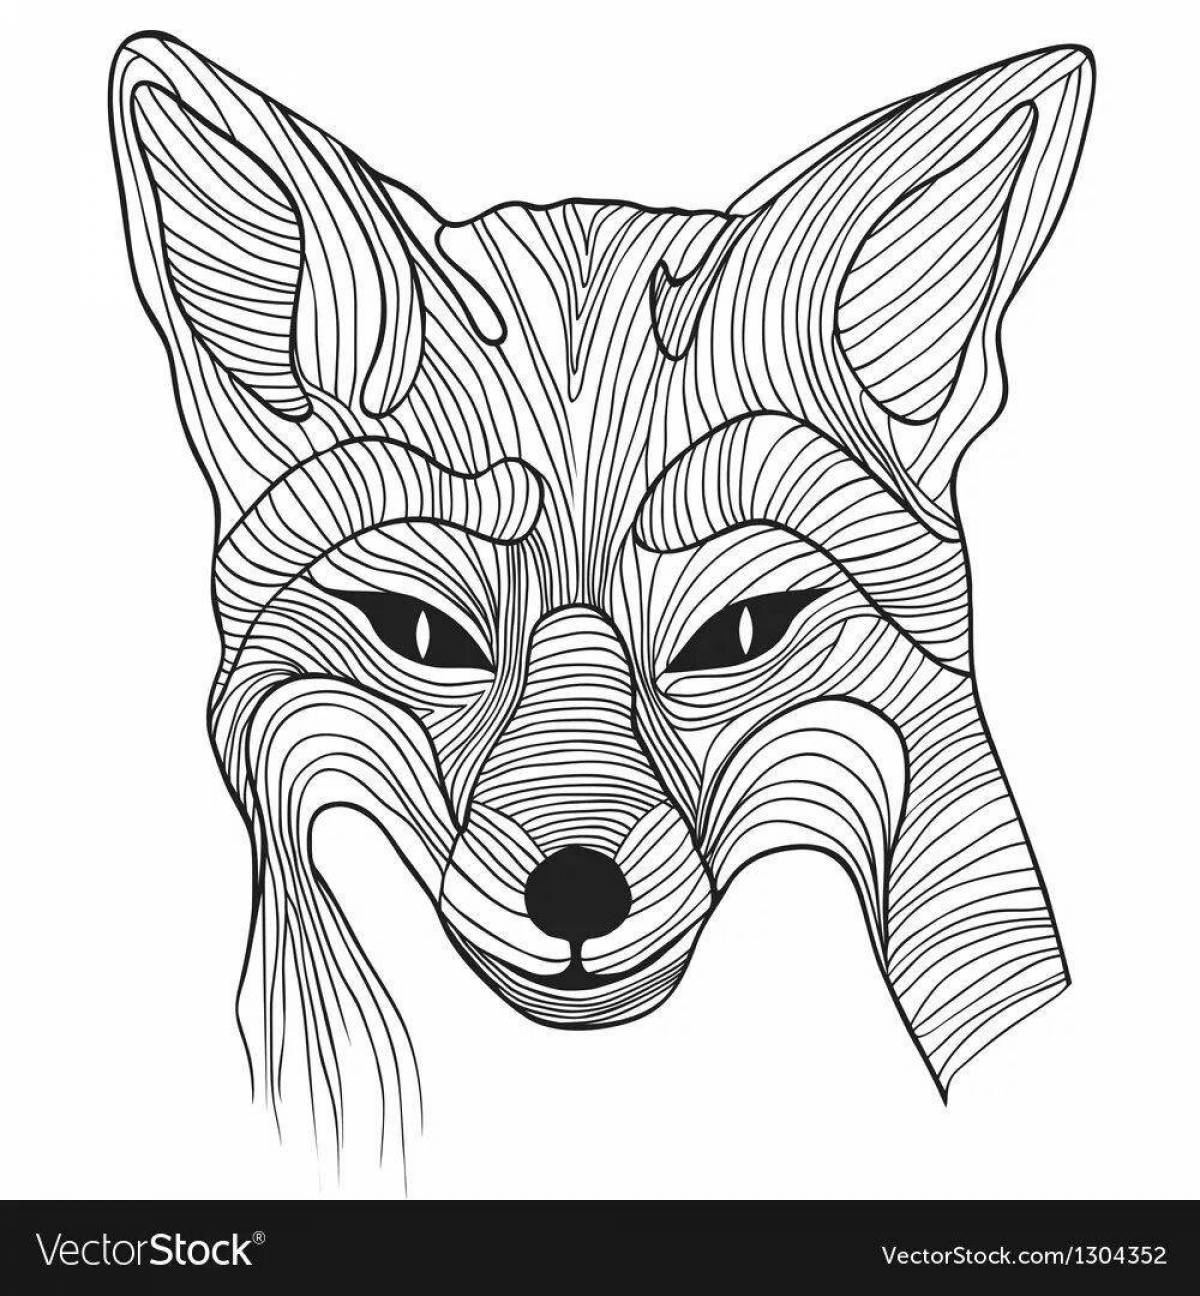 Vibrant fox coloring page